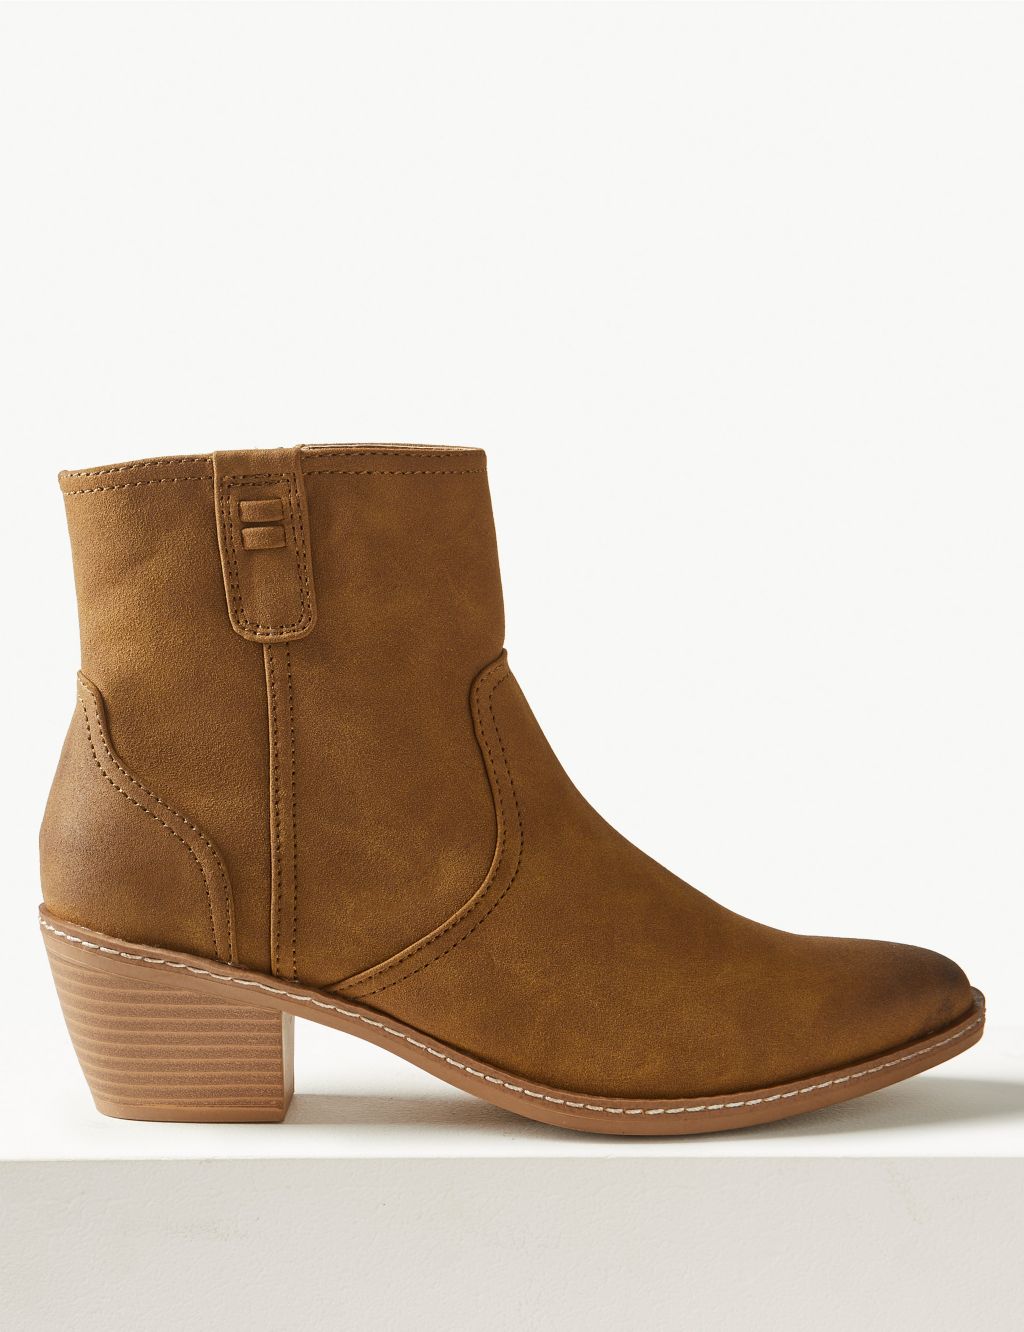 Almond Toe Ankle Boots 1 of 5